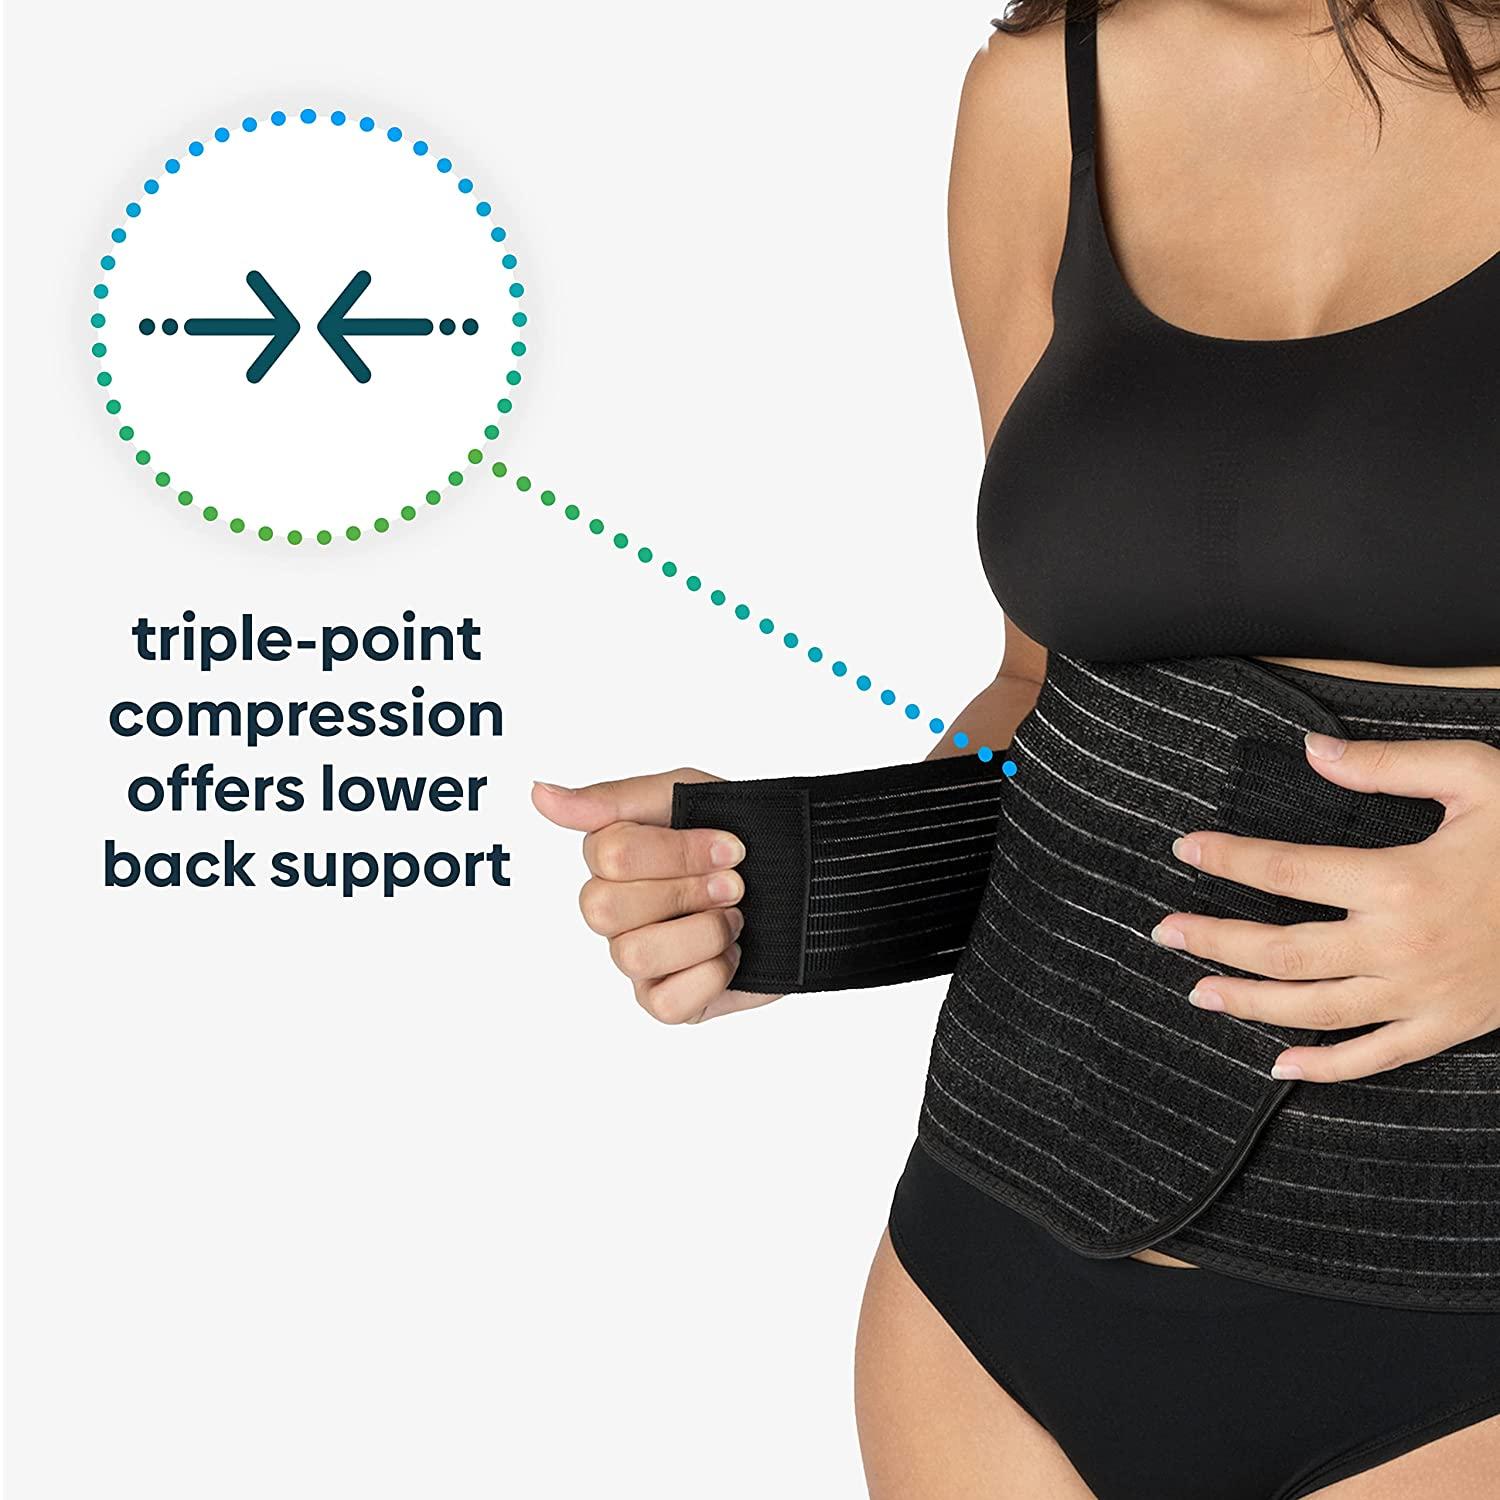 UpSpring Shrinkx Belly Postpartum Belly Wrap With Bamboo Charcoal Fiber  Size S/M Black